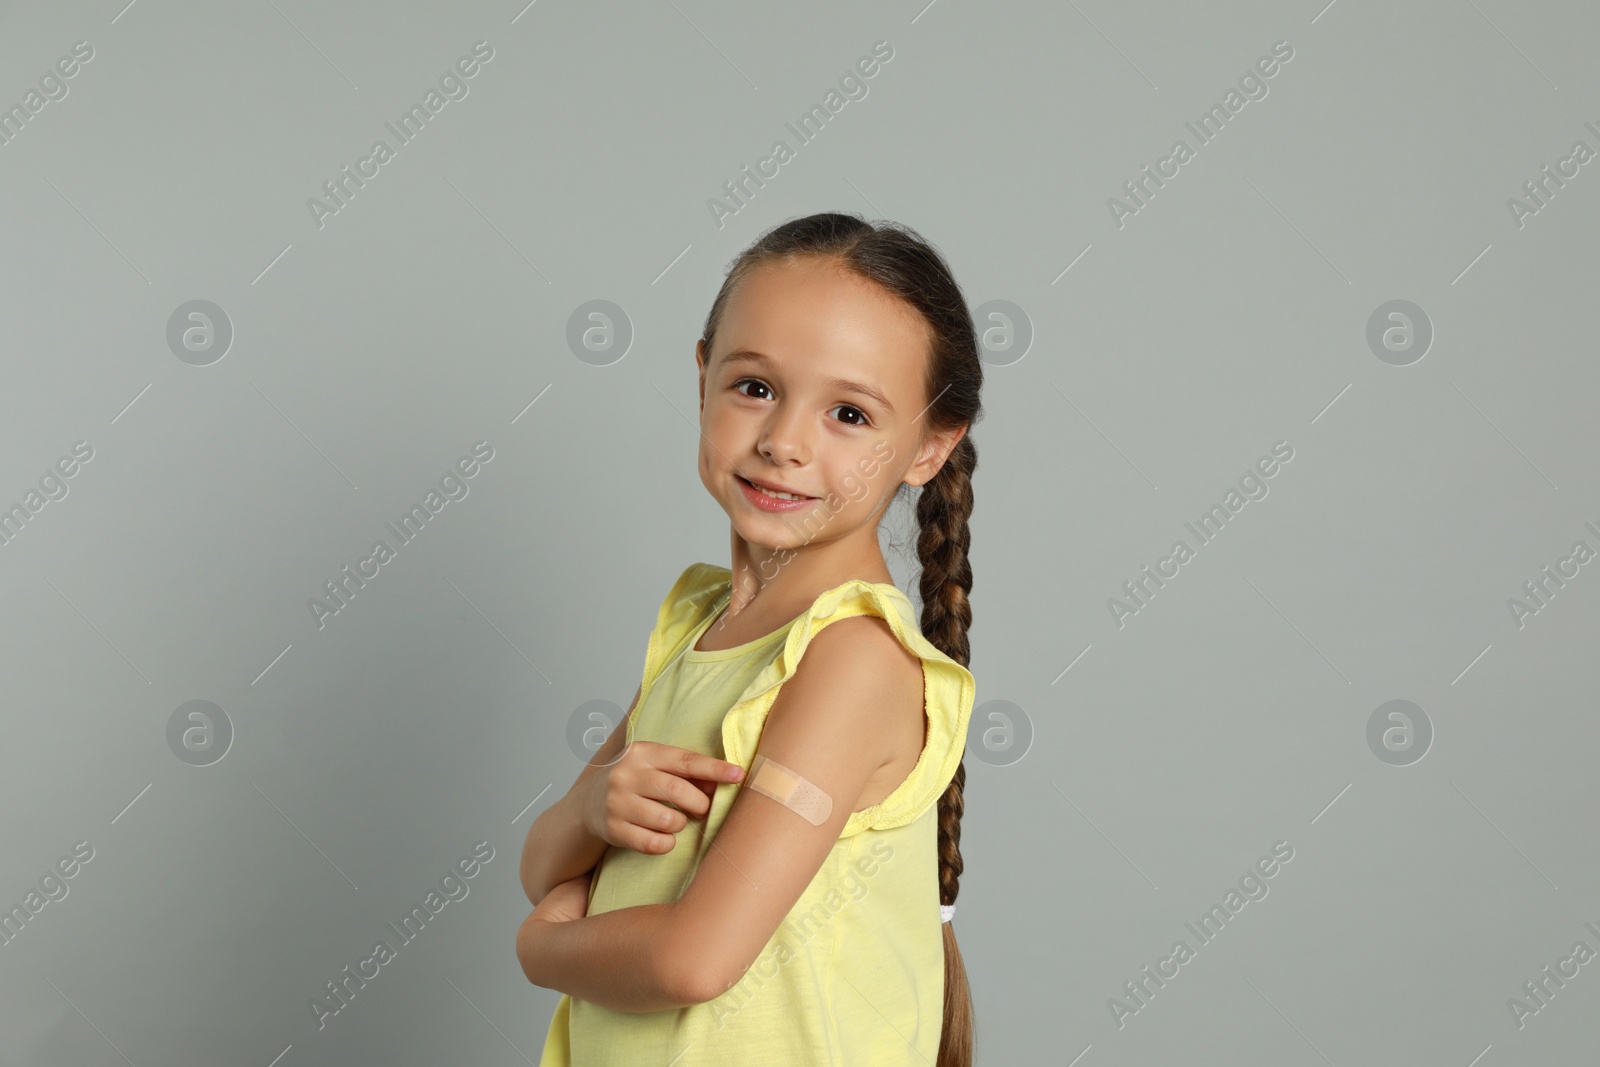 Photo of Vaccinated little girl showing medical plaster on her arm against light grey background